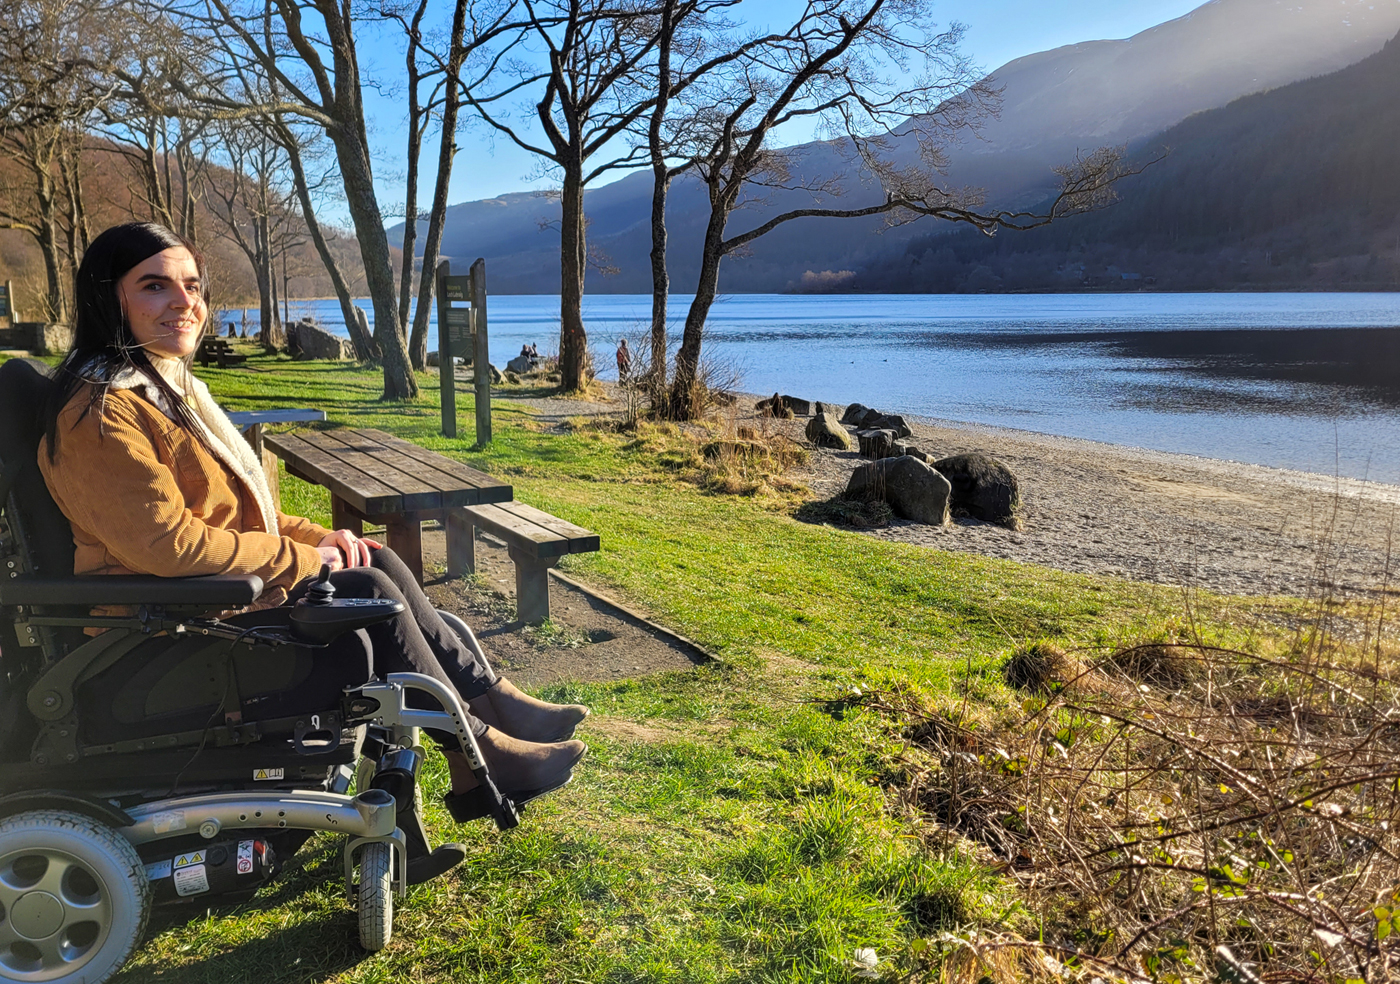 Emma sat in her power wheelchair on the grass next to loch Lubnaig. Emma is smiling at the camera.